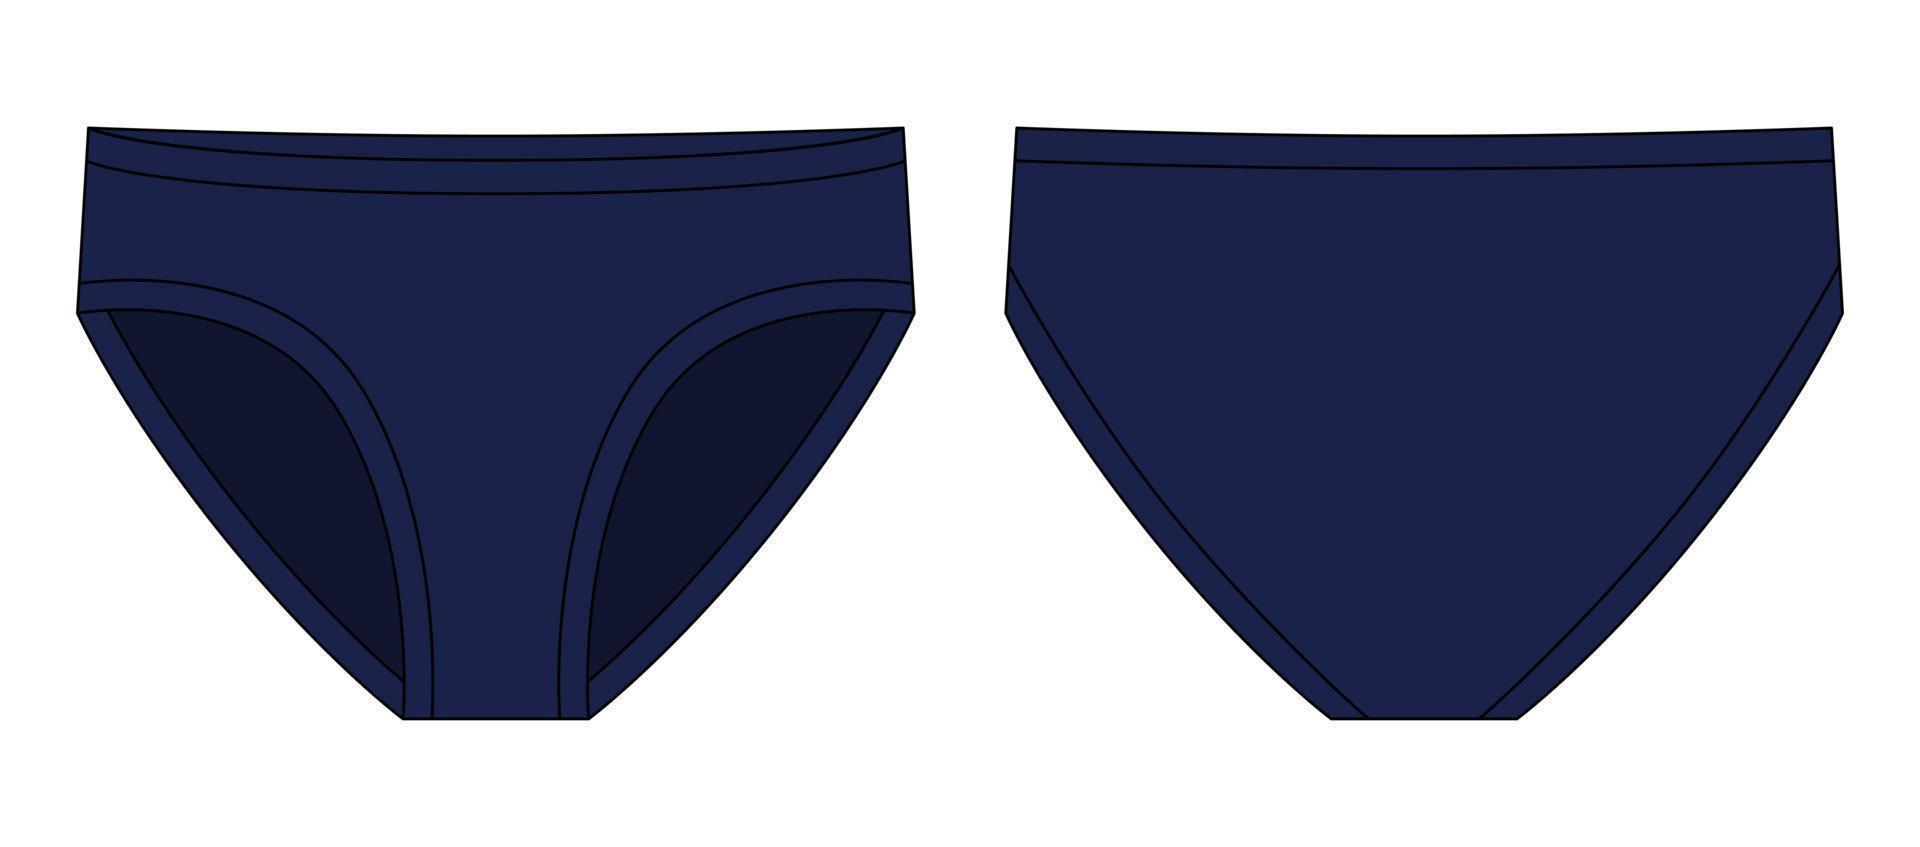 Technical sketch of briefs for girls. Female red underpants. Dark